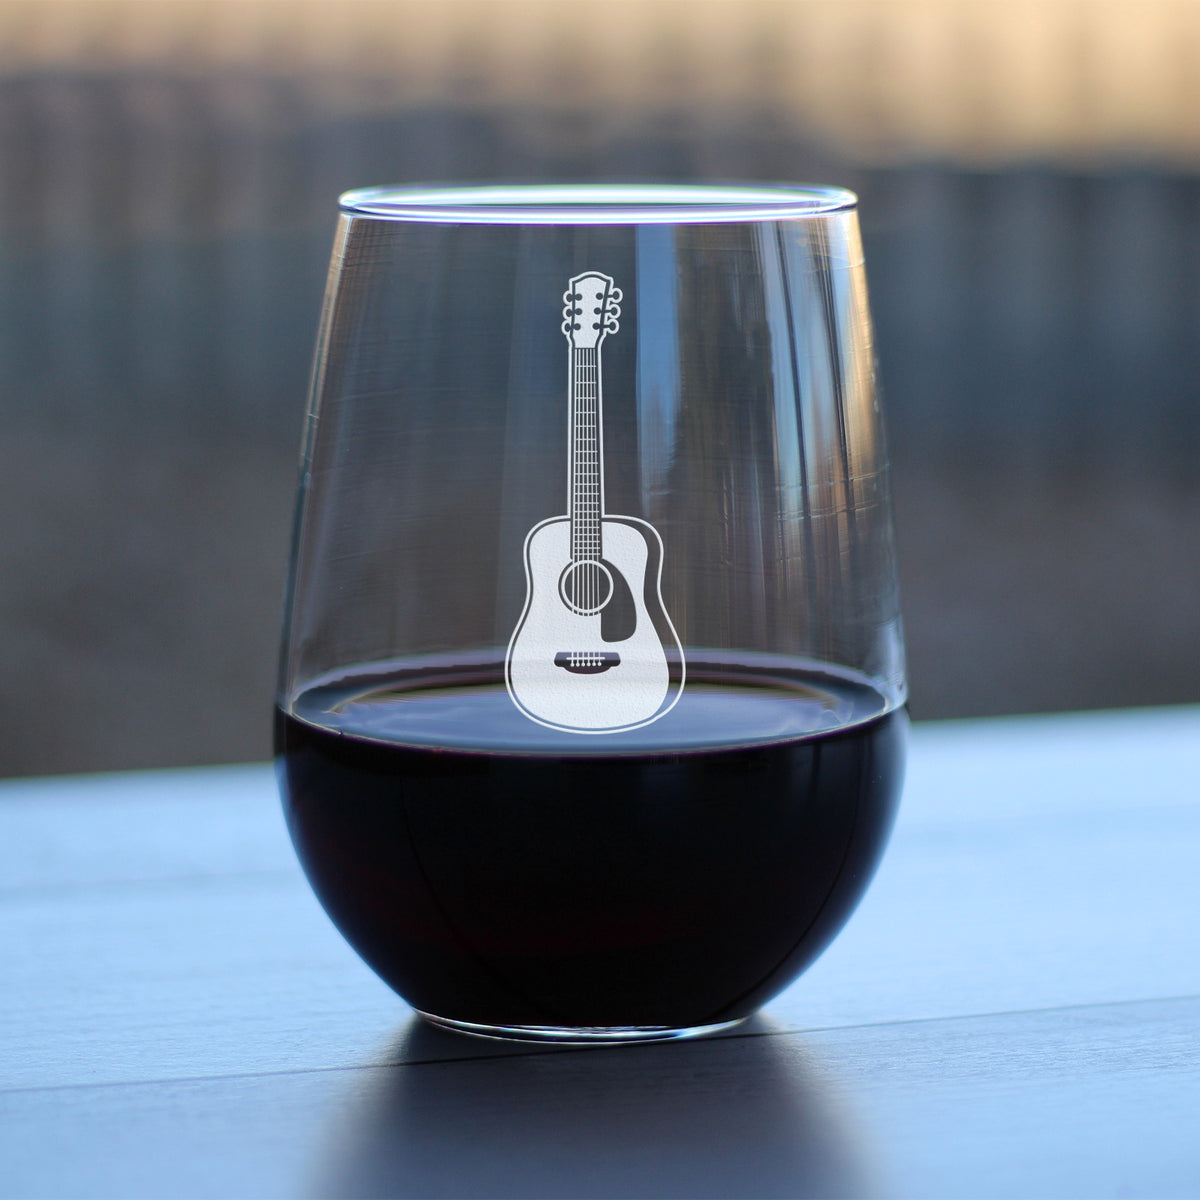 Guitar - Stemless Wine Glass - Fun Musician Gifts and Musical Accessories for Women and Men - Large 17 Oz Glasses